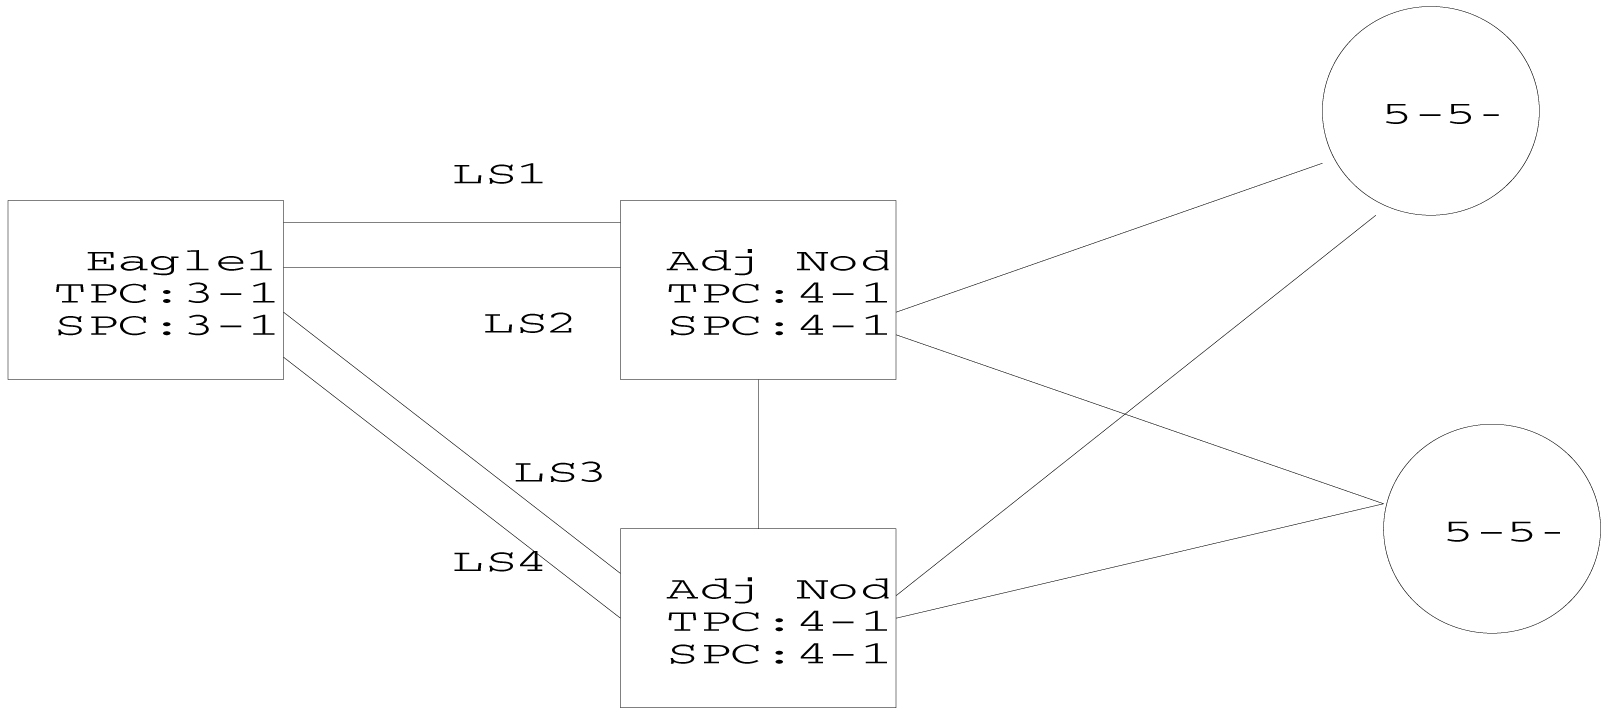 img/c_multiple_point_code_support_release_26_05_prf-fig3.jpg